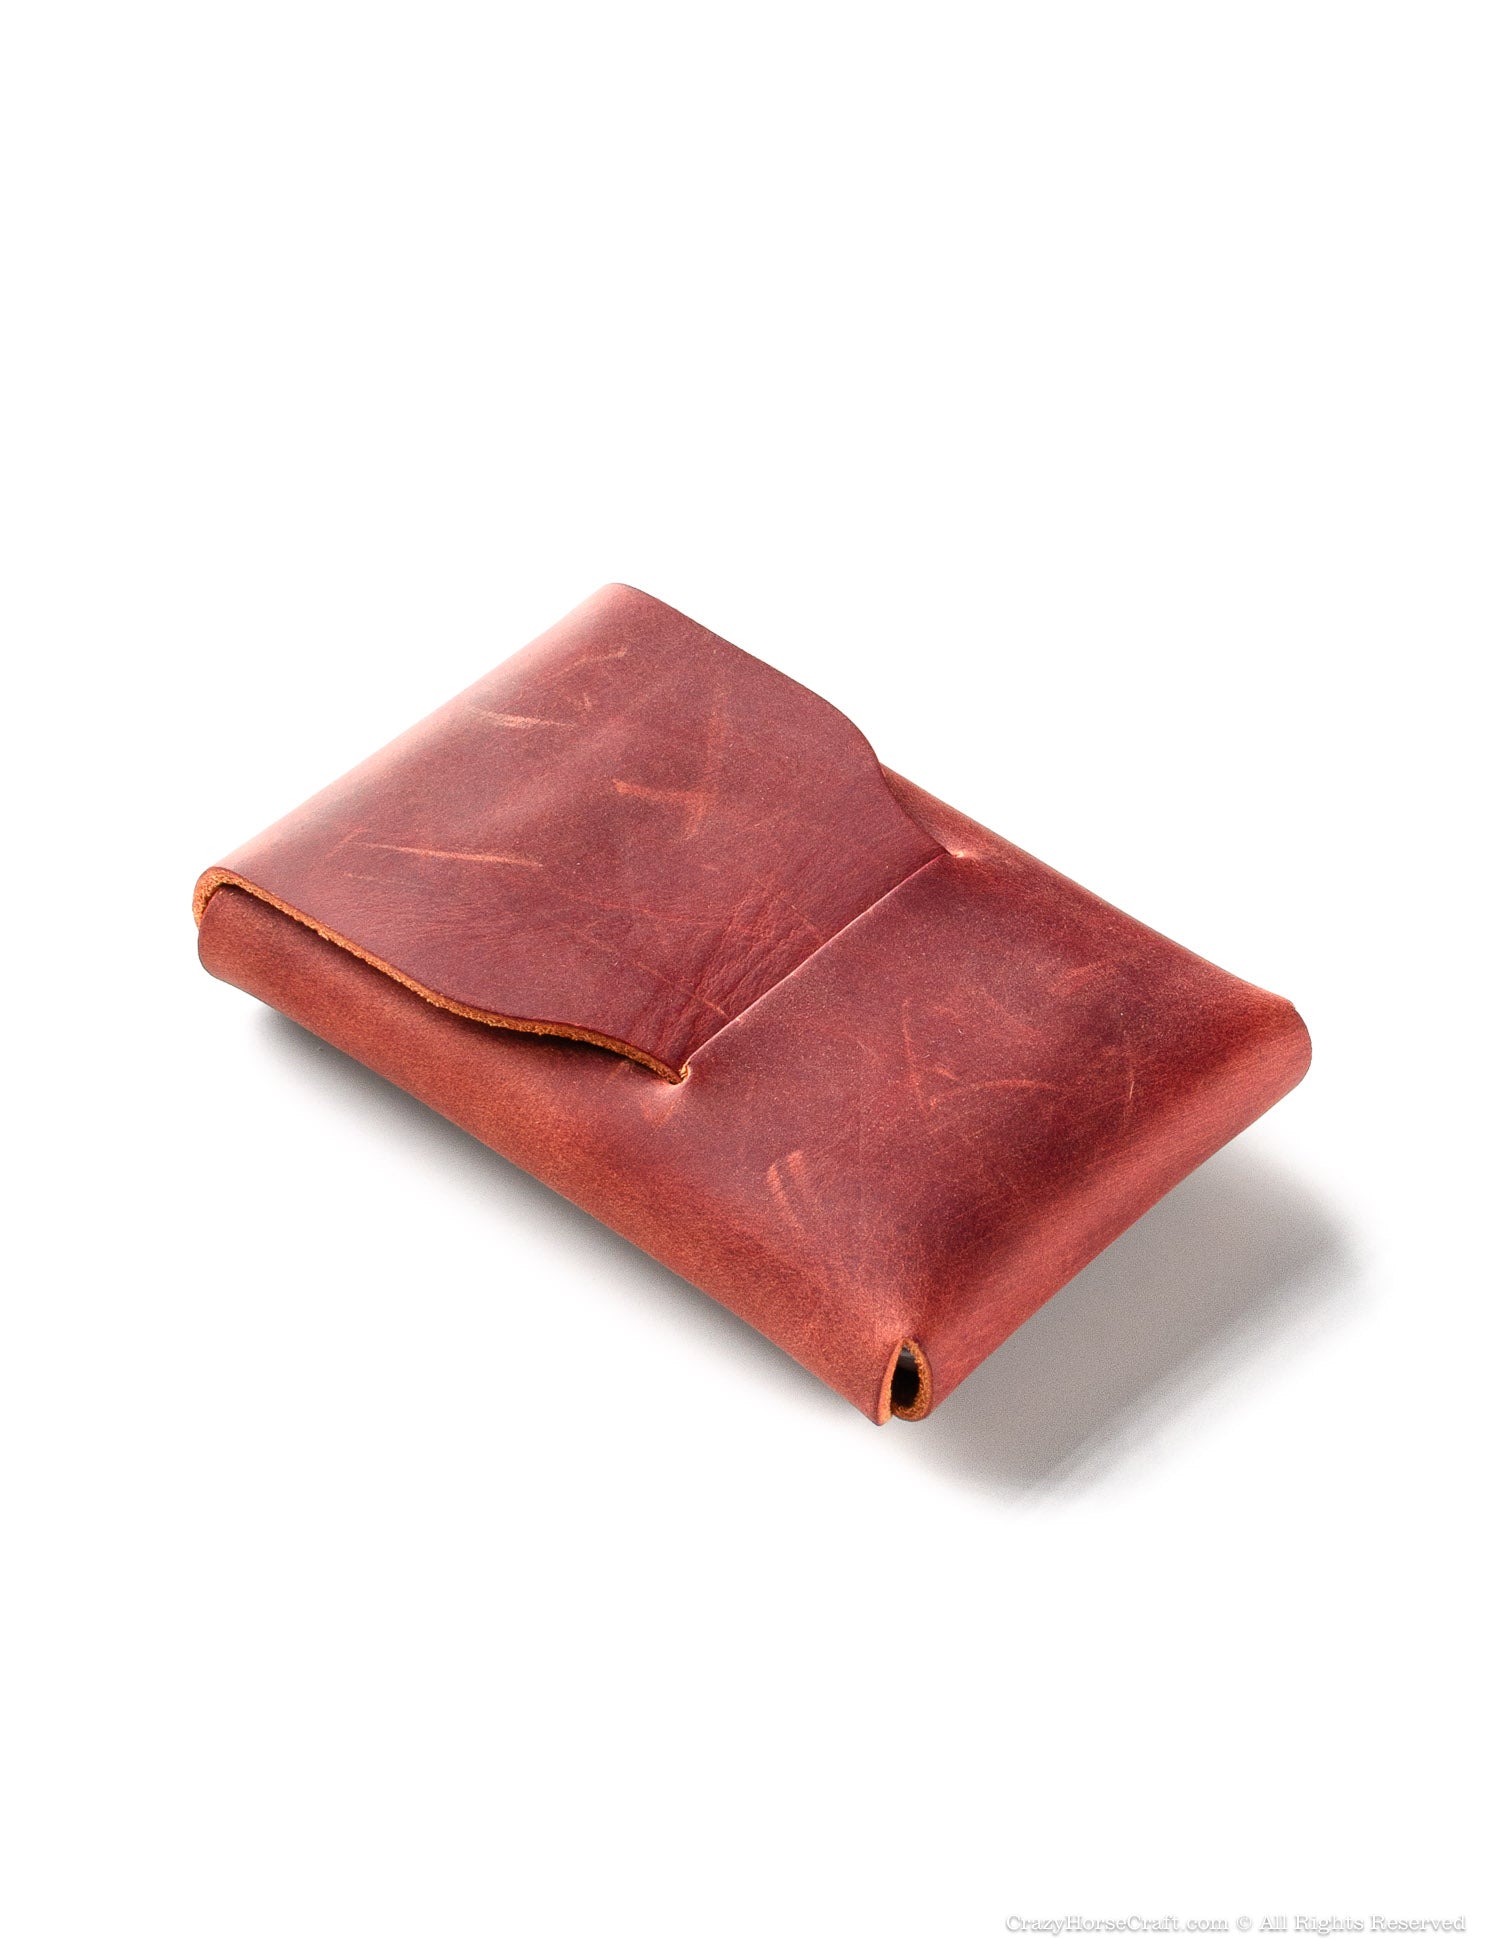 #color of the leather_fragola red